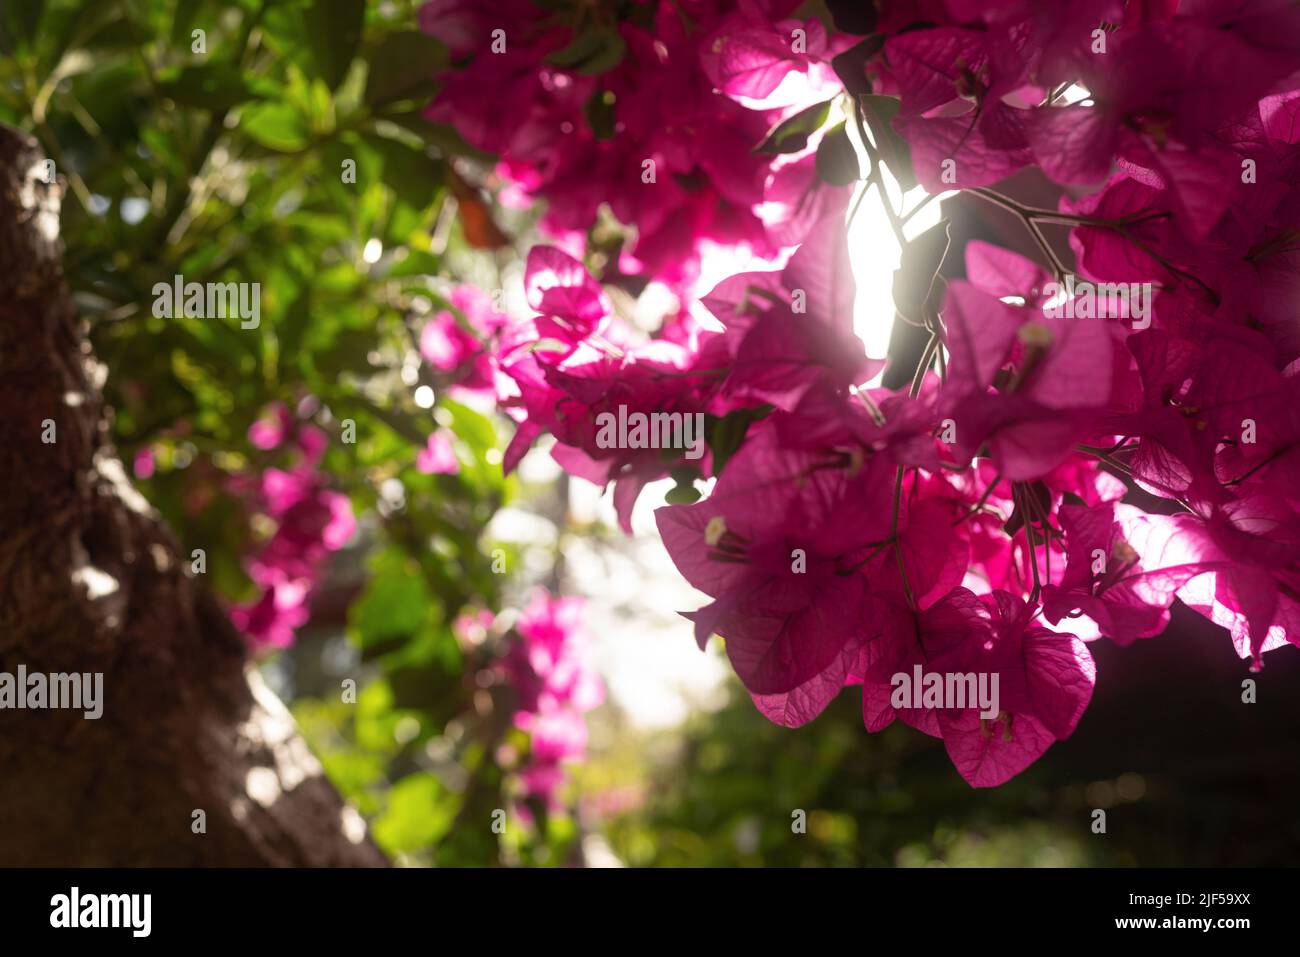 Pink bougainvillea flowers. Mostly blurred photo of a floral background Stock Photo